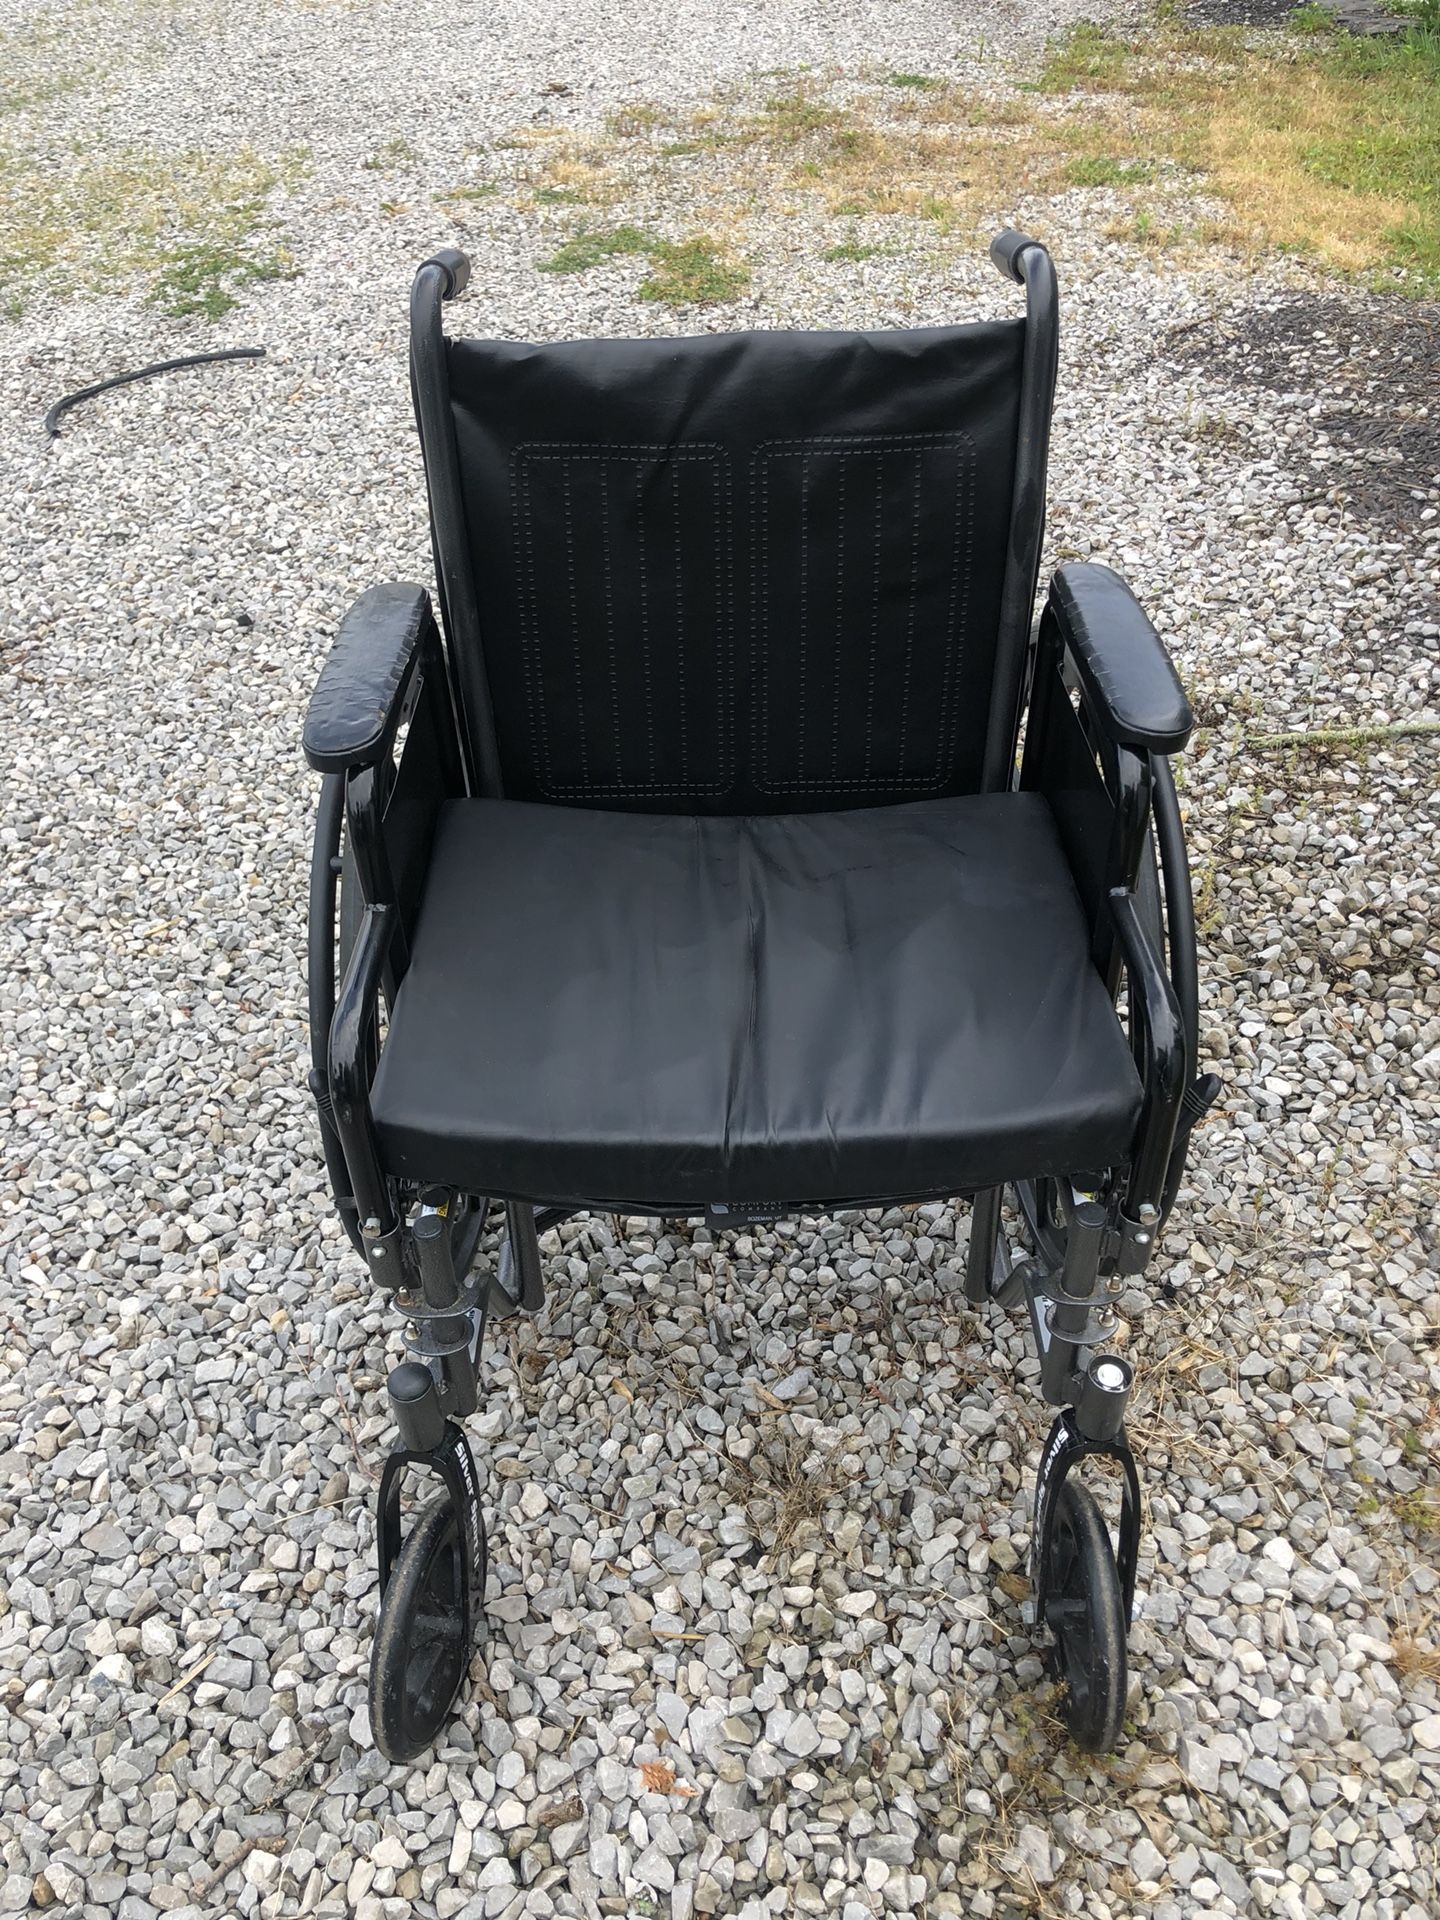 Wheelchair that collapses for easy travel. With Comfort Element cushion.